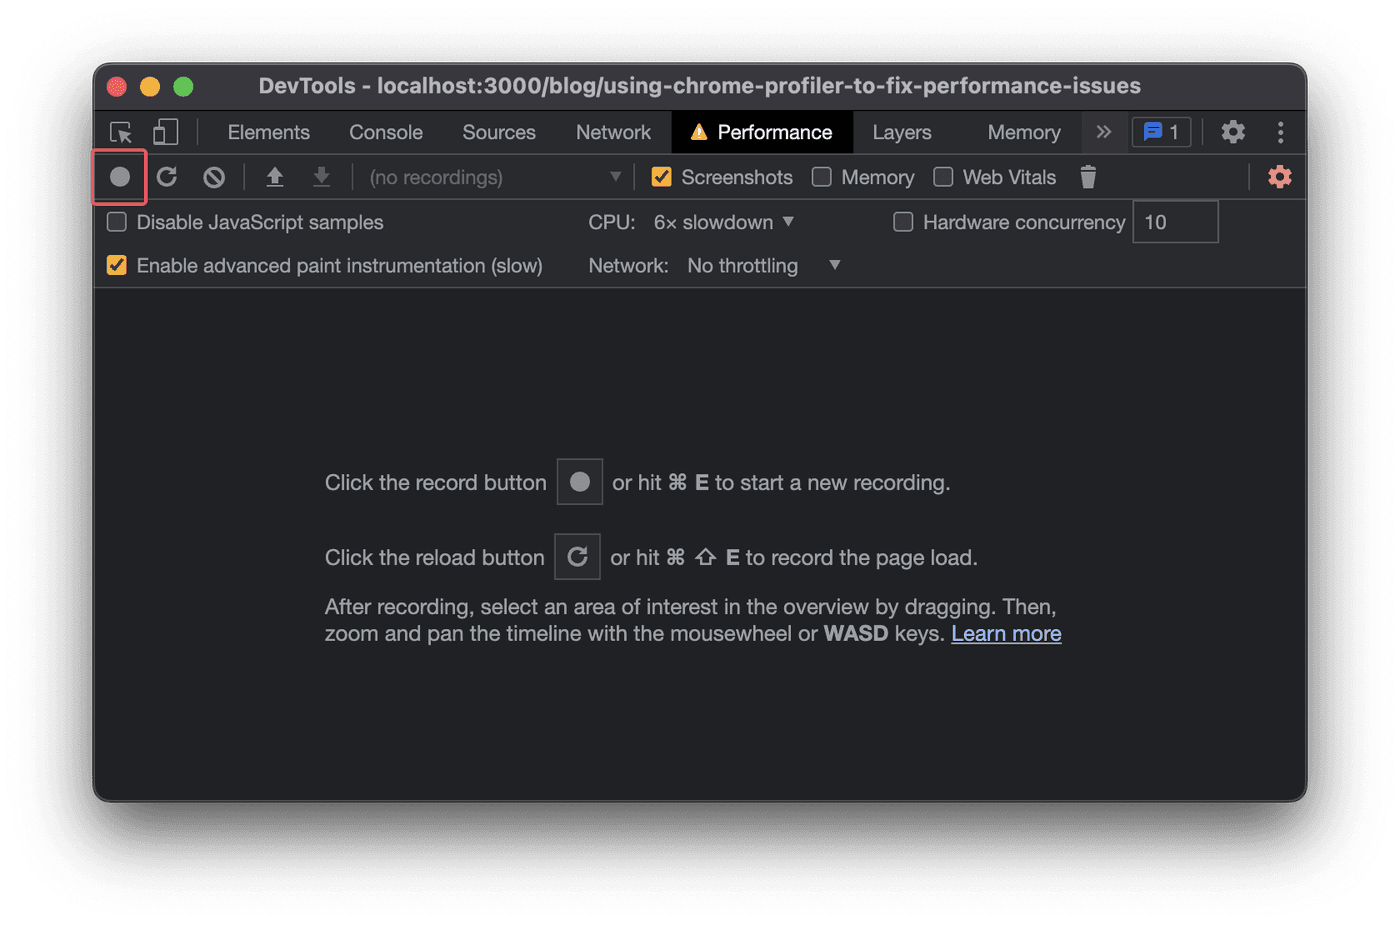 Chrome DevTools performance panel with the record button highlighted.